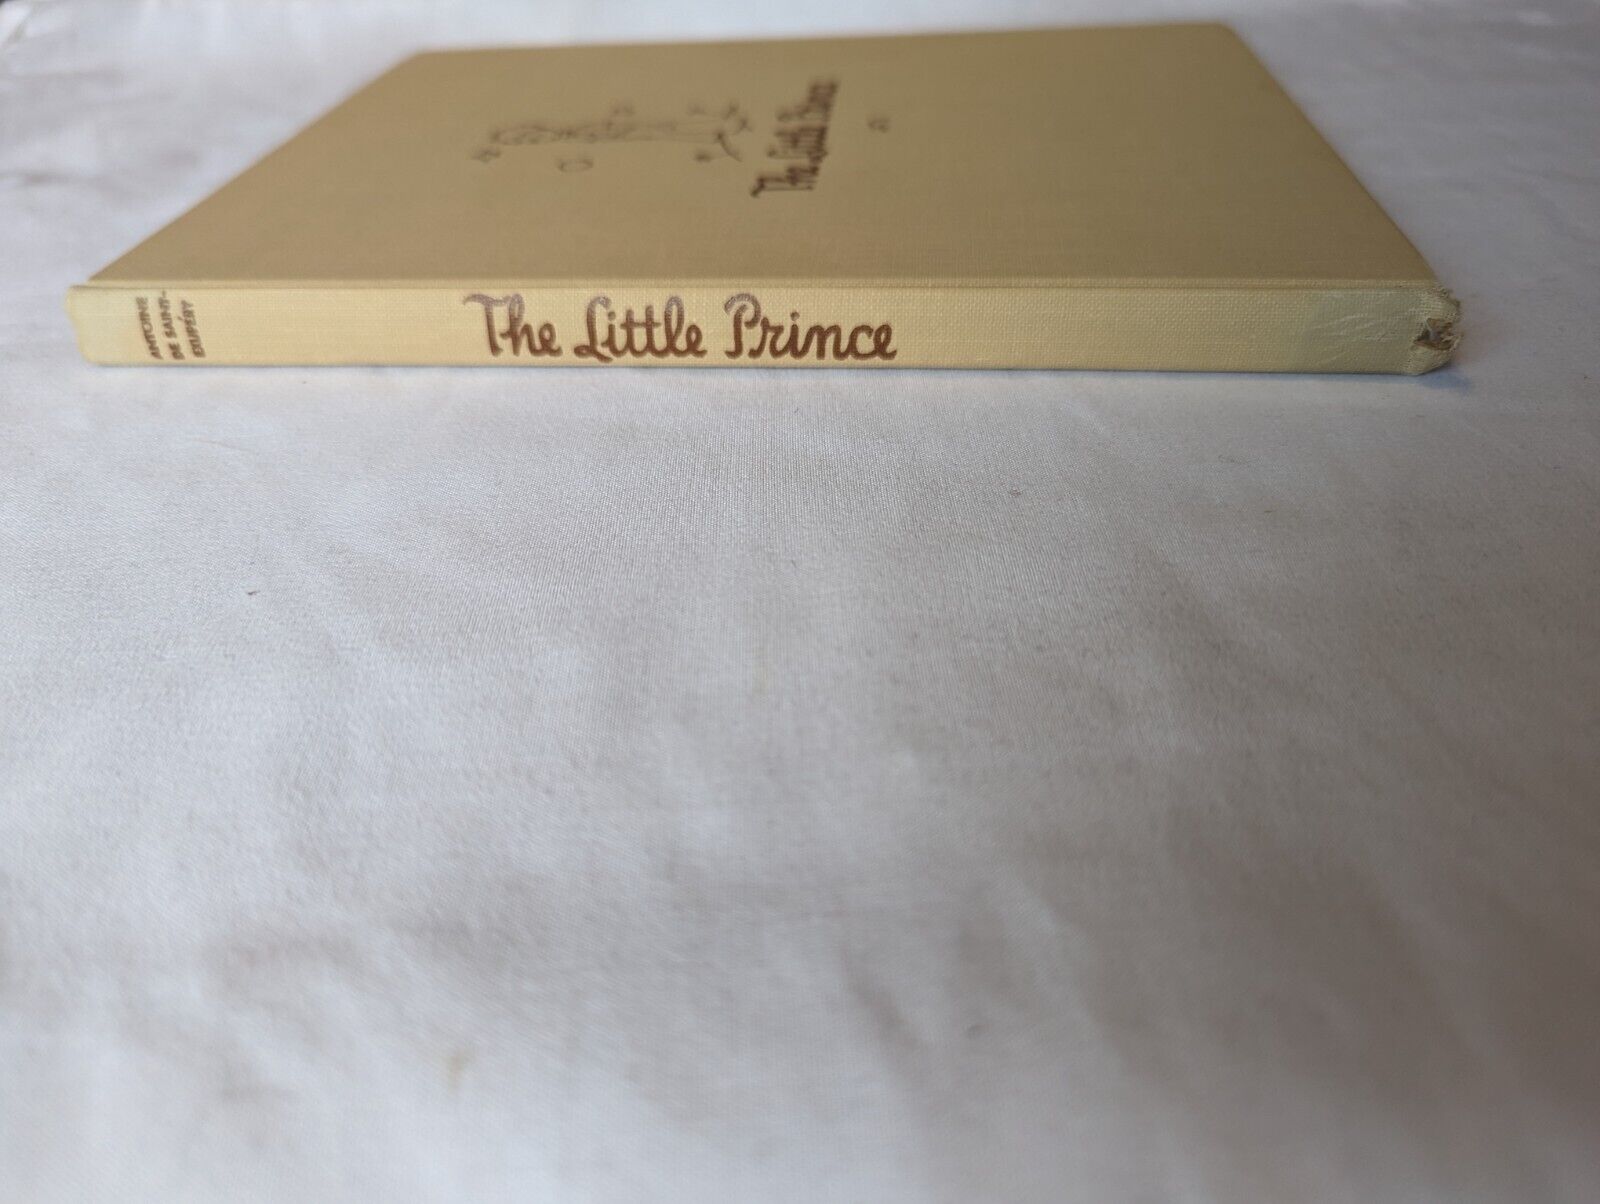 The Little Prince by Antoine De Saint-Exupery First English Edition, 1943,